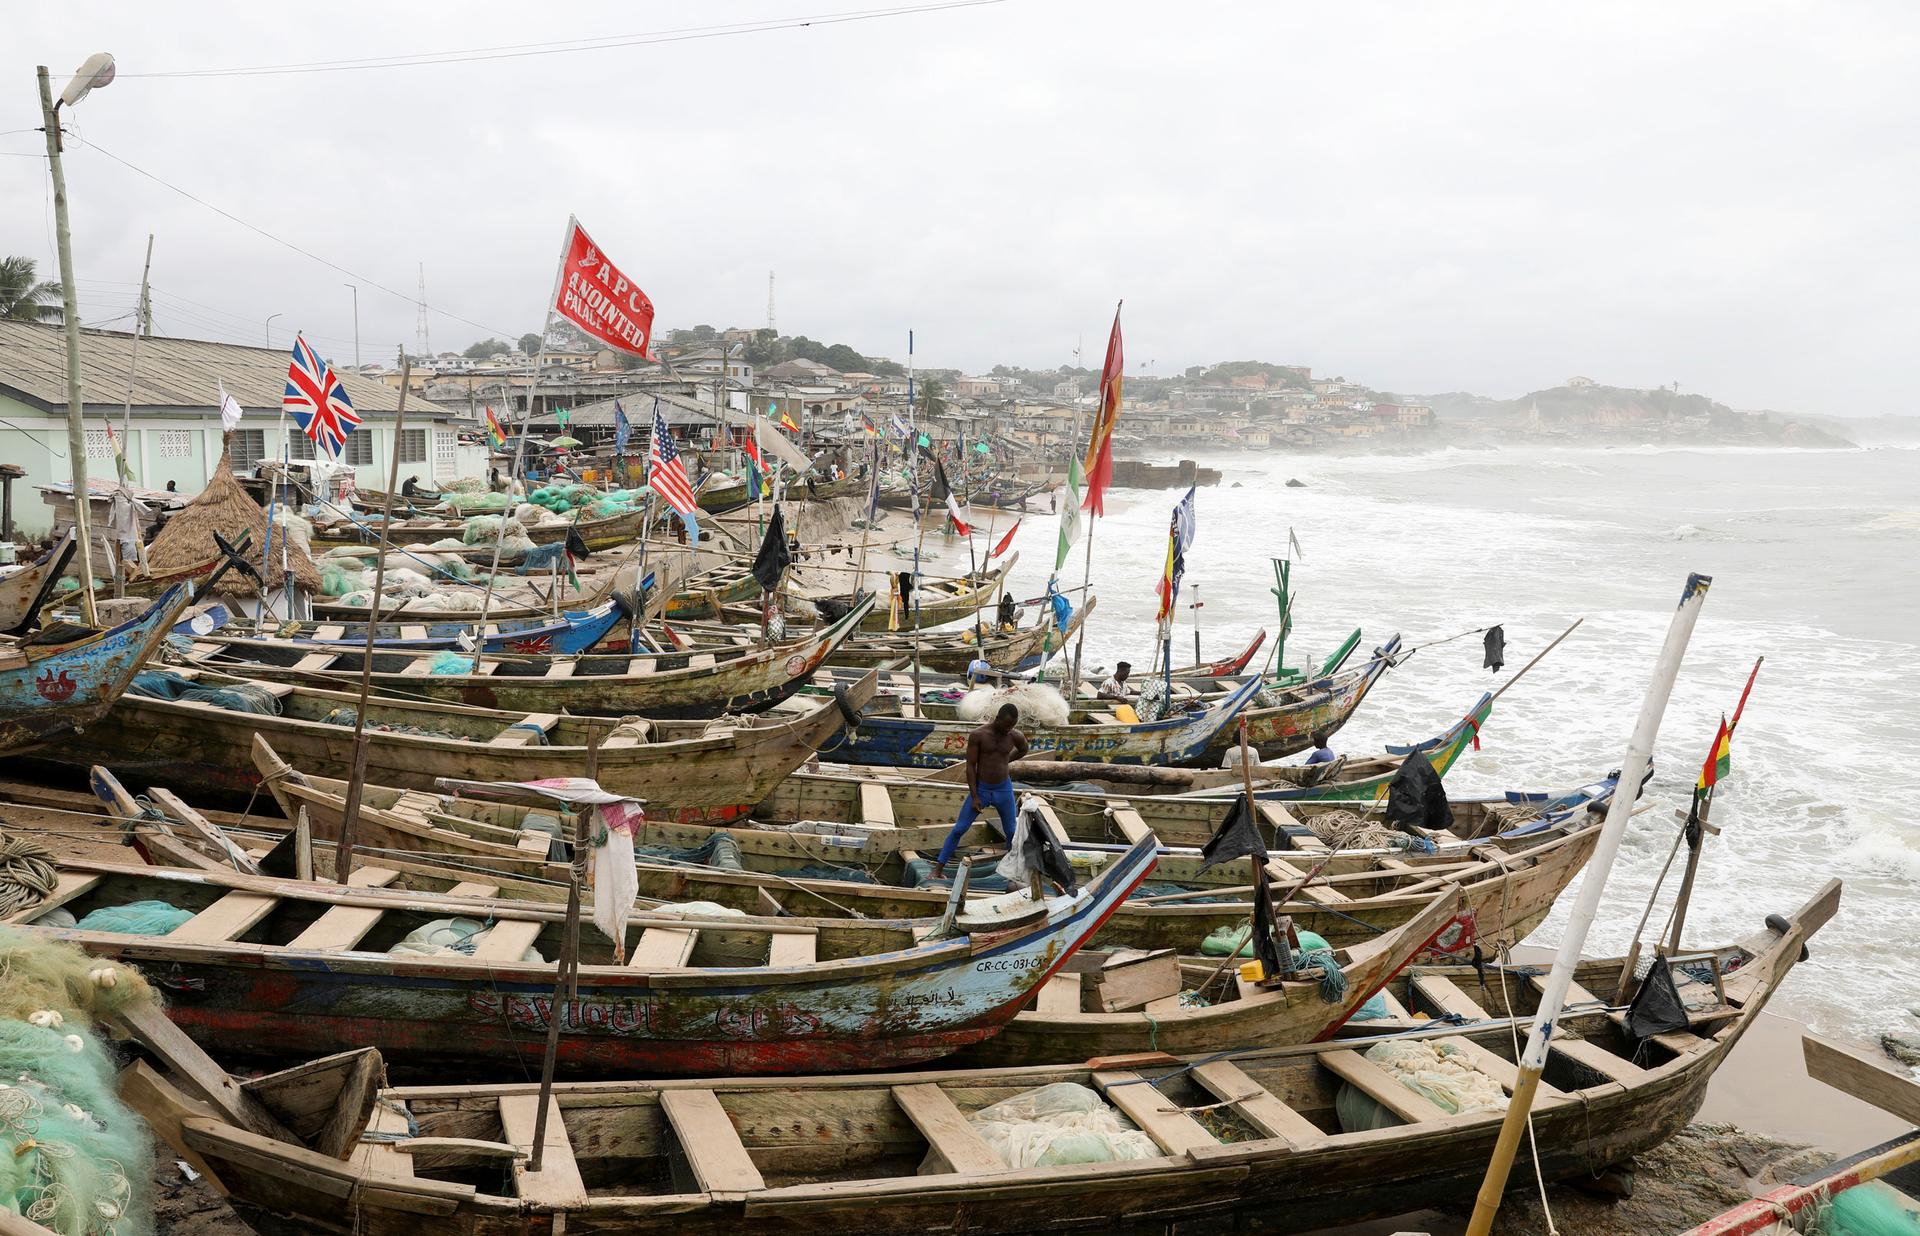 Several long wooden boats are shown in a row on the beach.